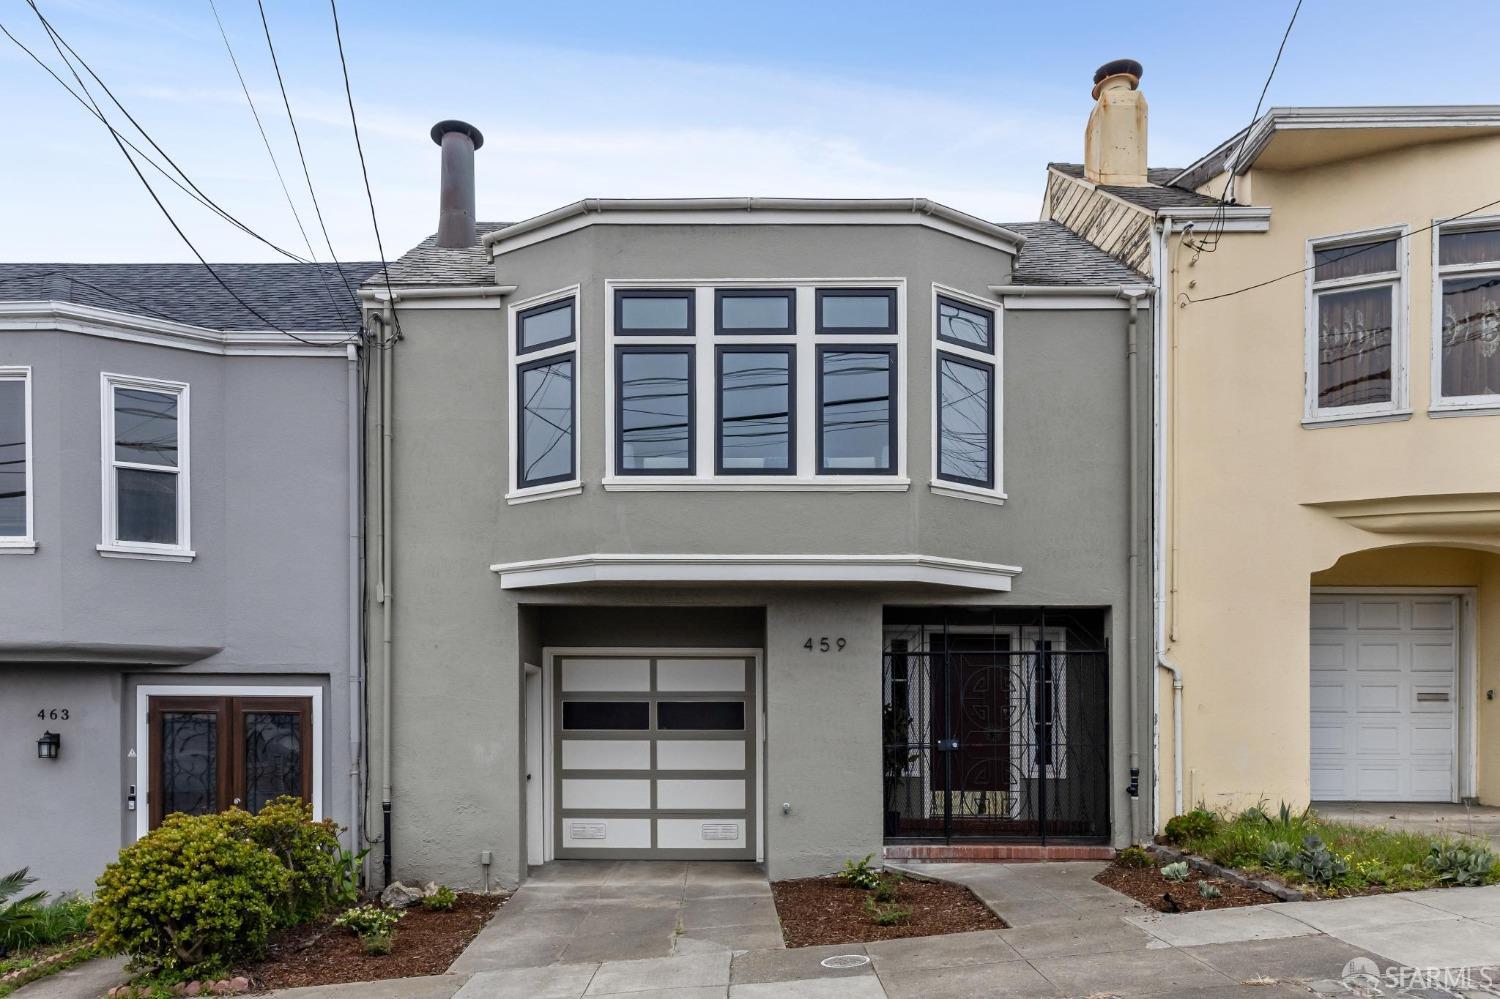 Photo of 459 40th Ave in San Francisco, CA